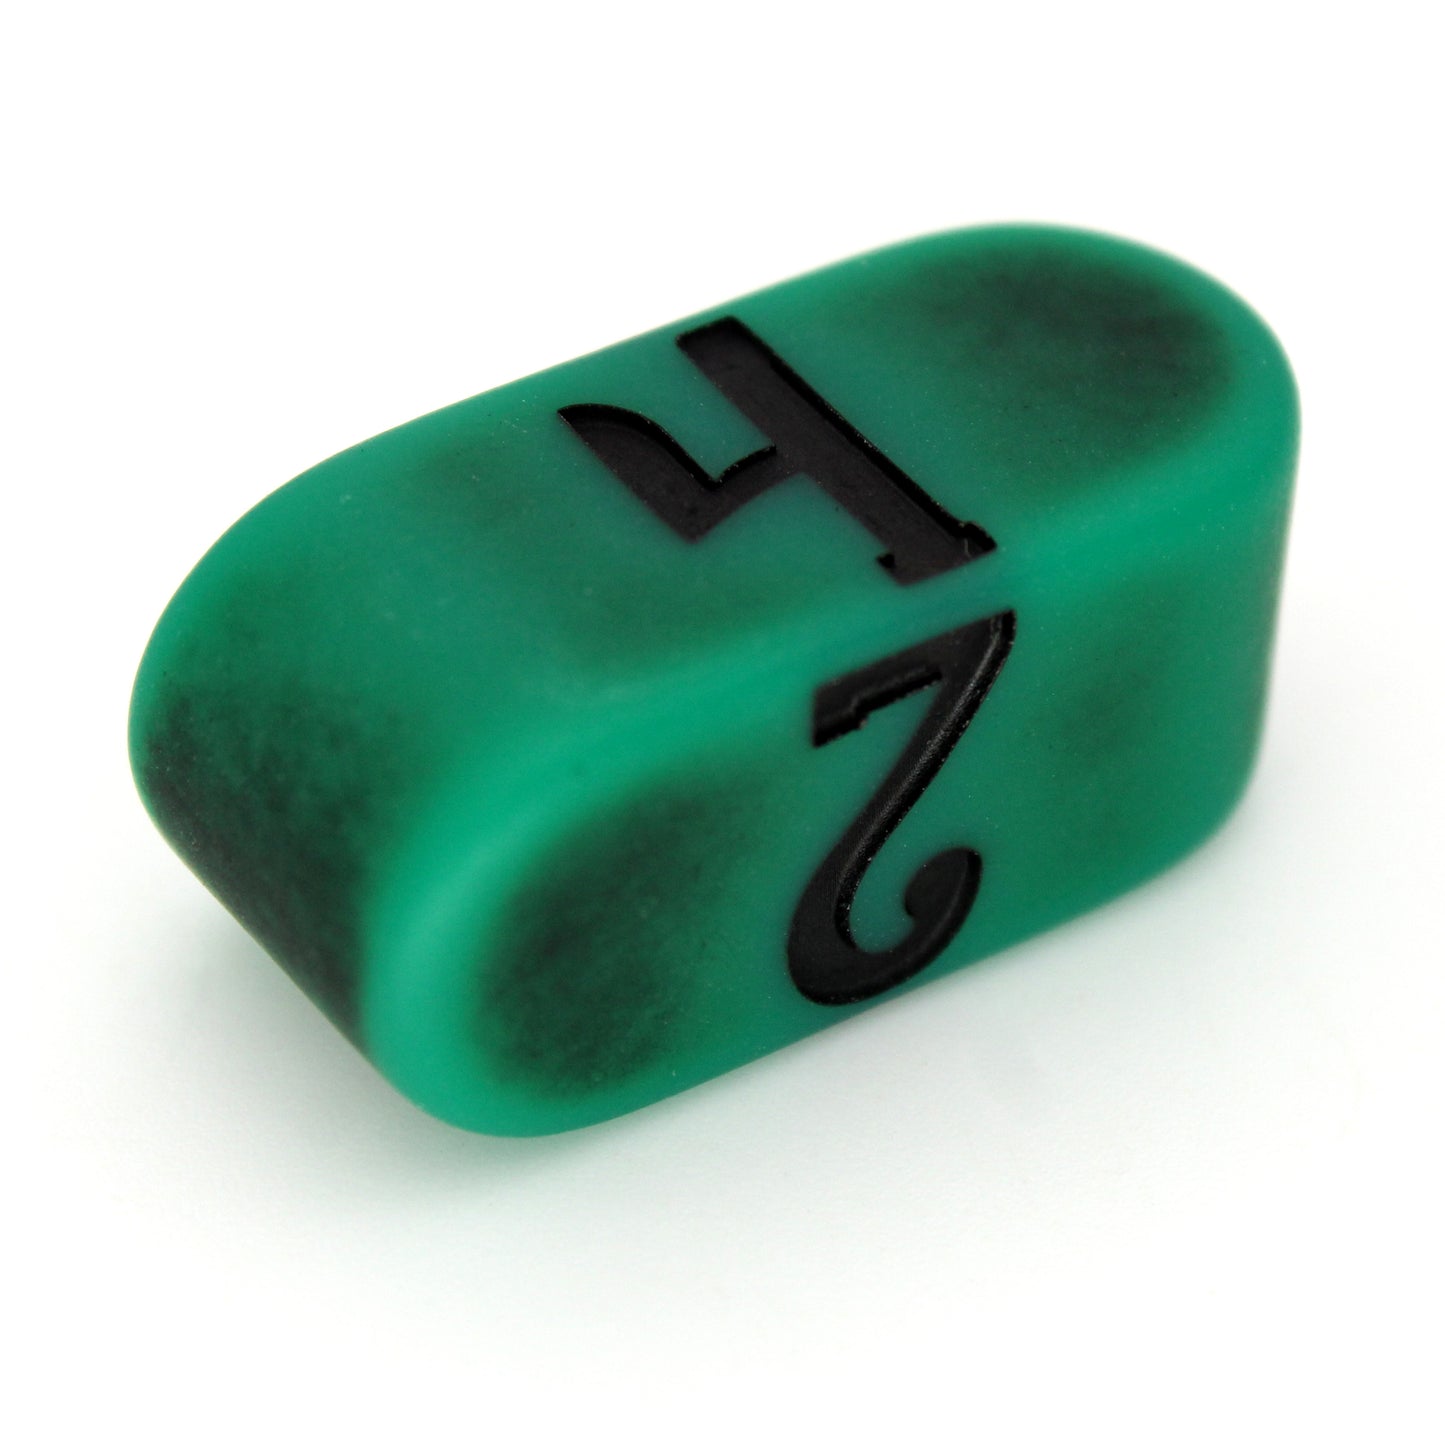 Naga Hide Infinity is a brilliant green acrylic Infinity d4 with a matte finish and darkened pattern, inked in black.